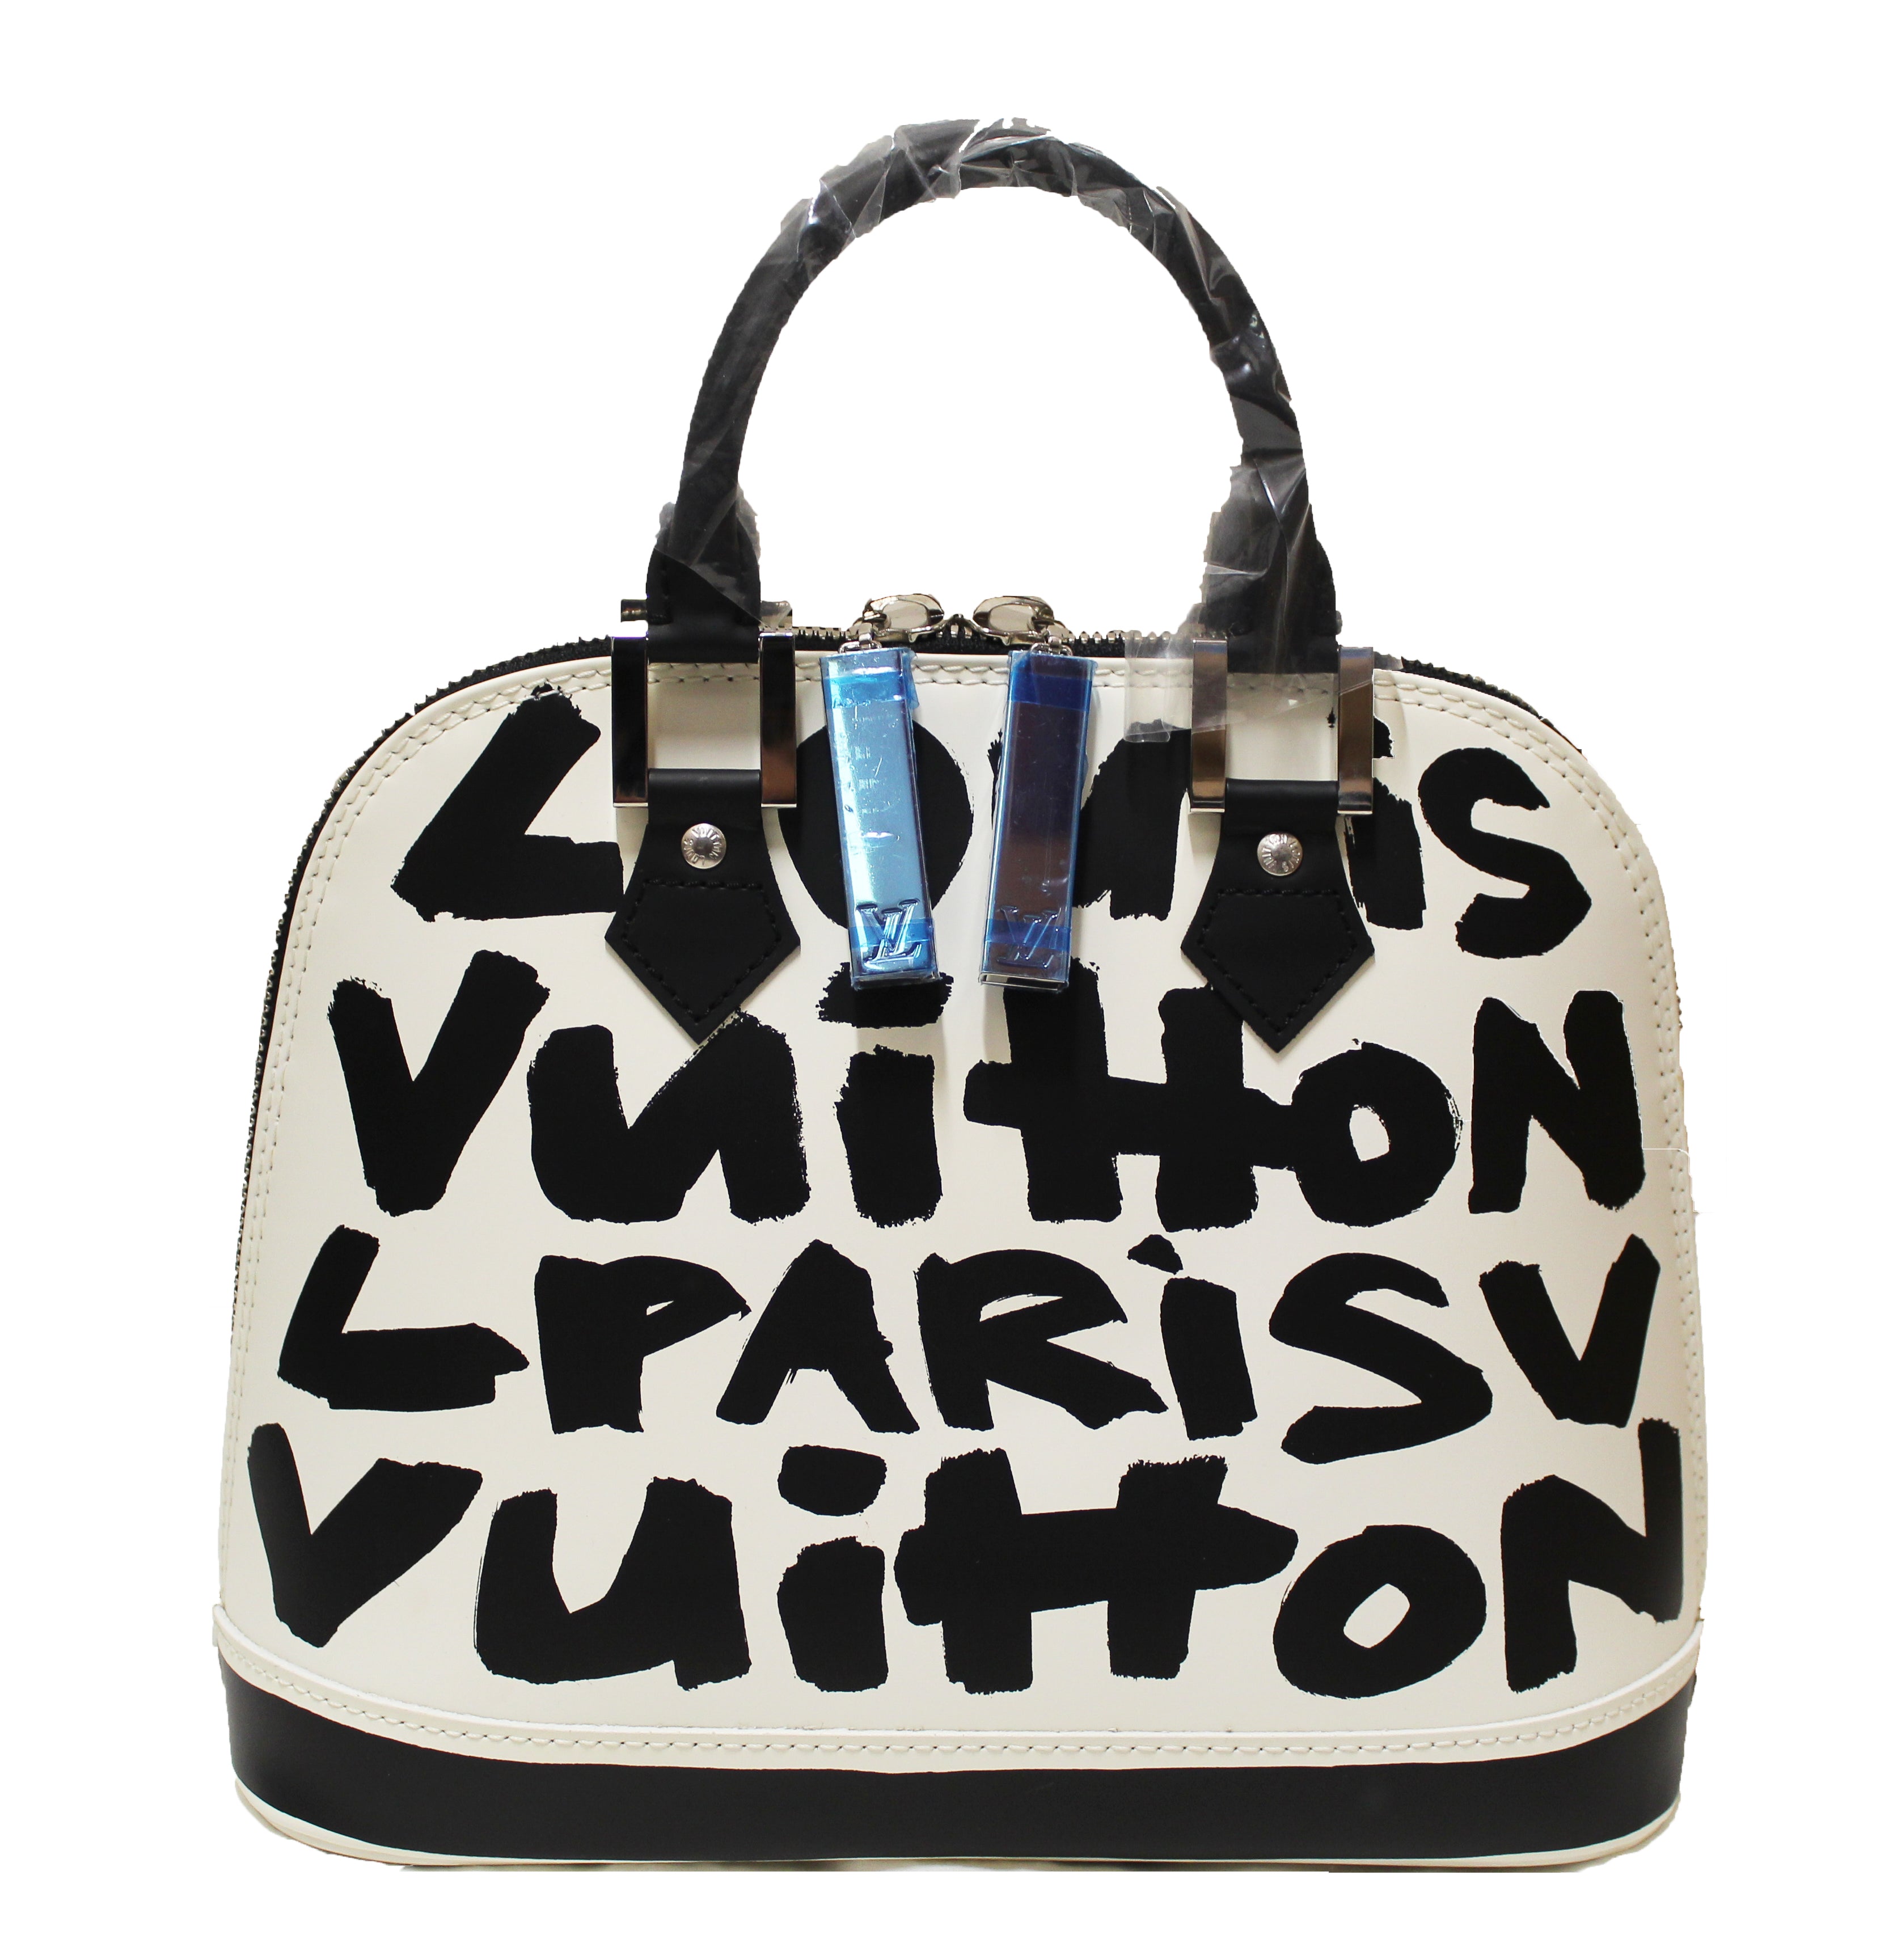 Authentic New Limited Edition Louis Vuitton White Alma MM Sprouse